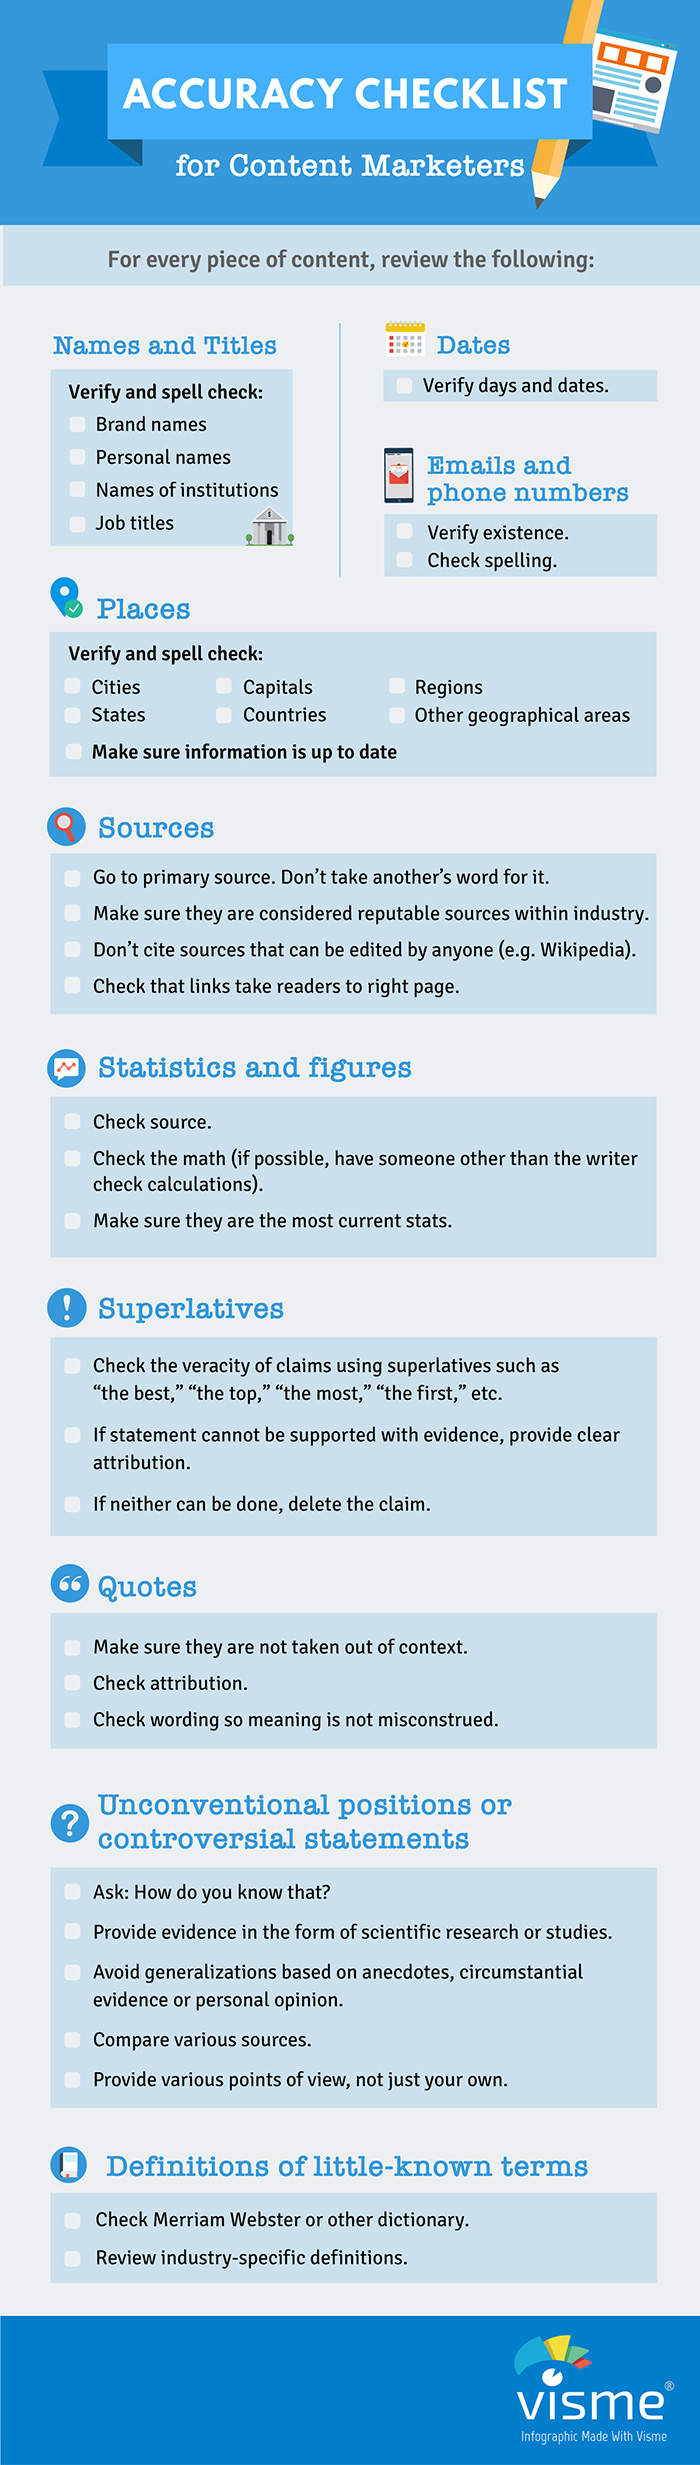 Fact-Verification Checklist for Content Marketers